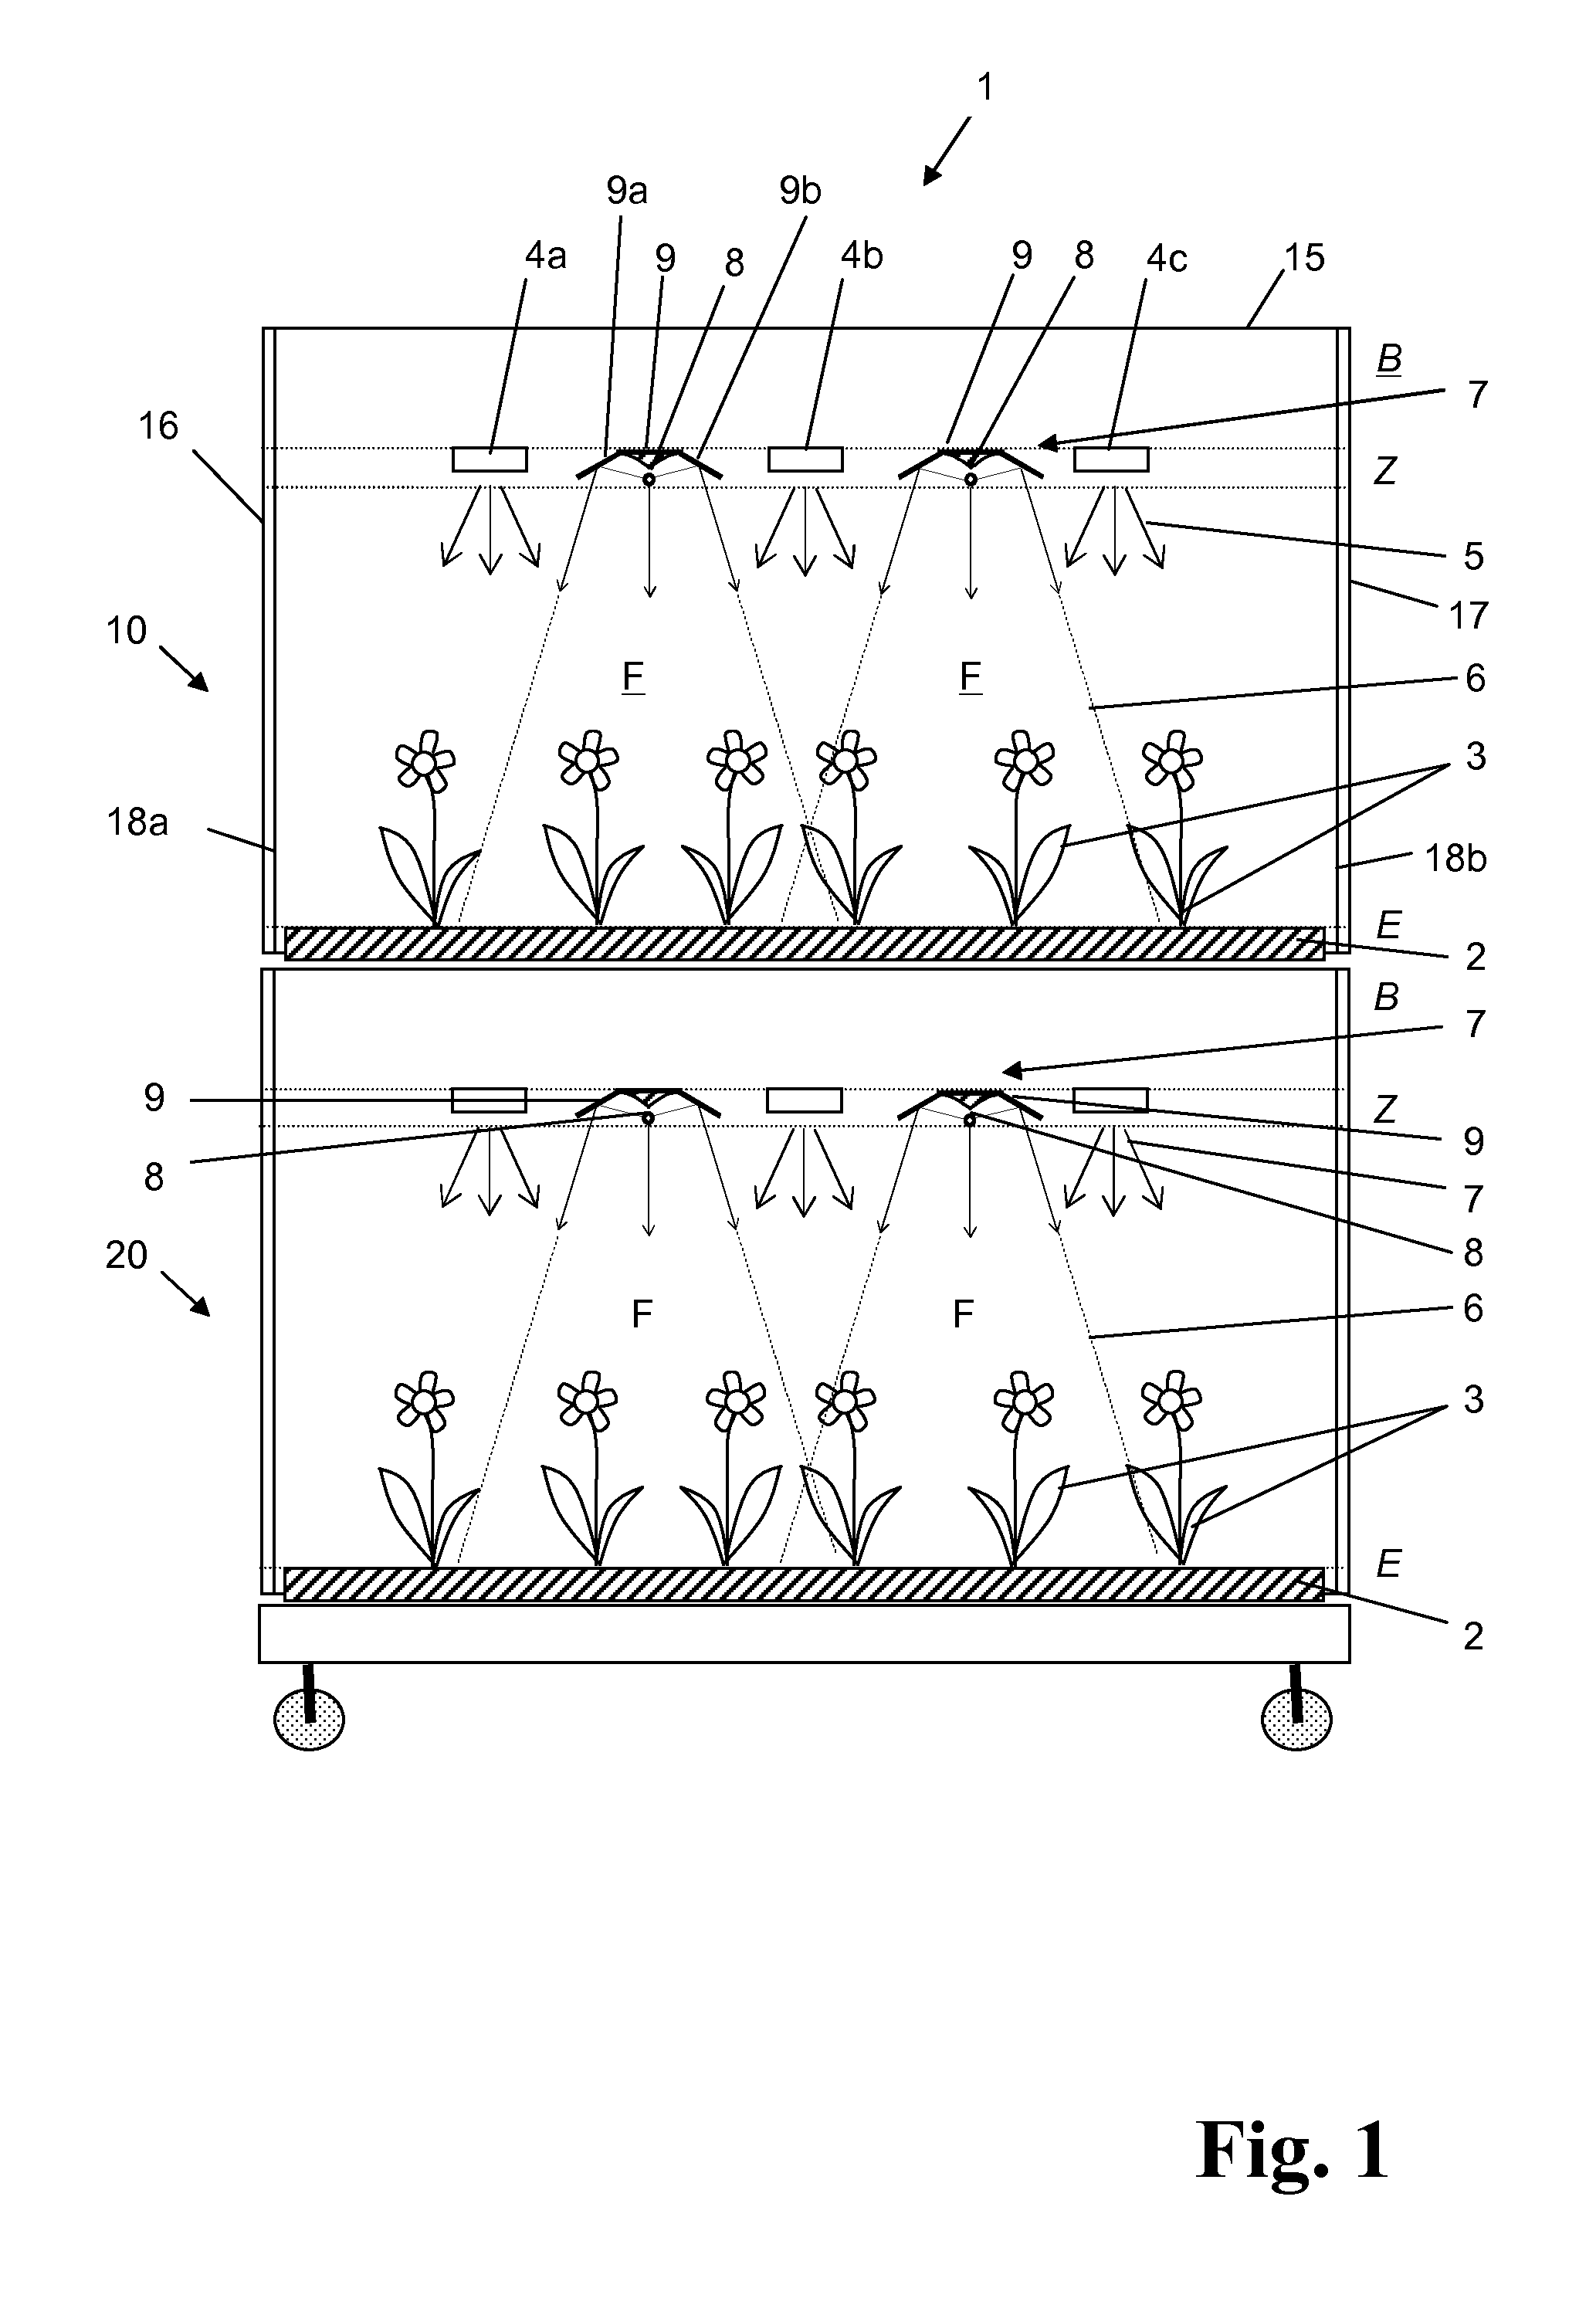 Irradiation device for irradiating plants